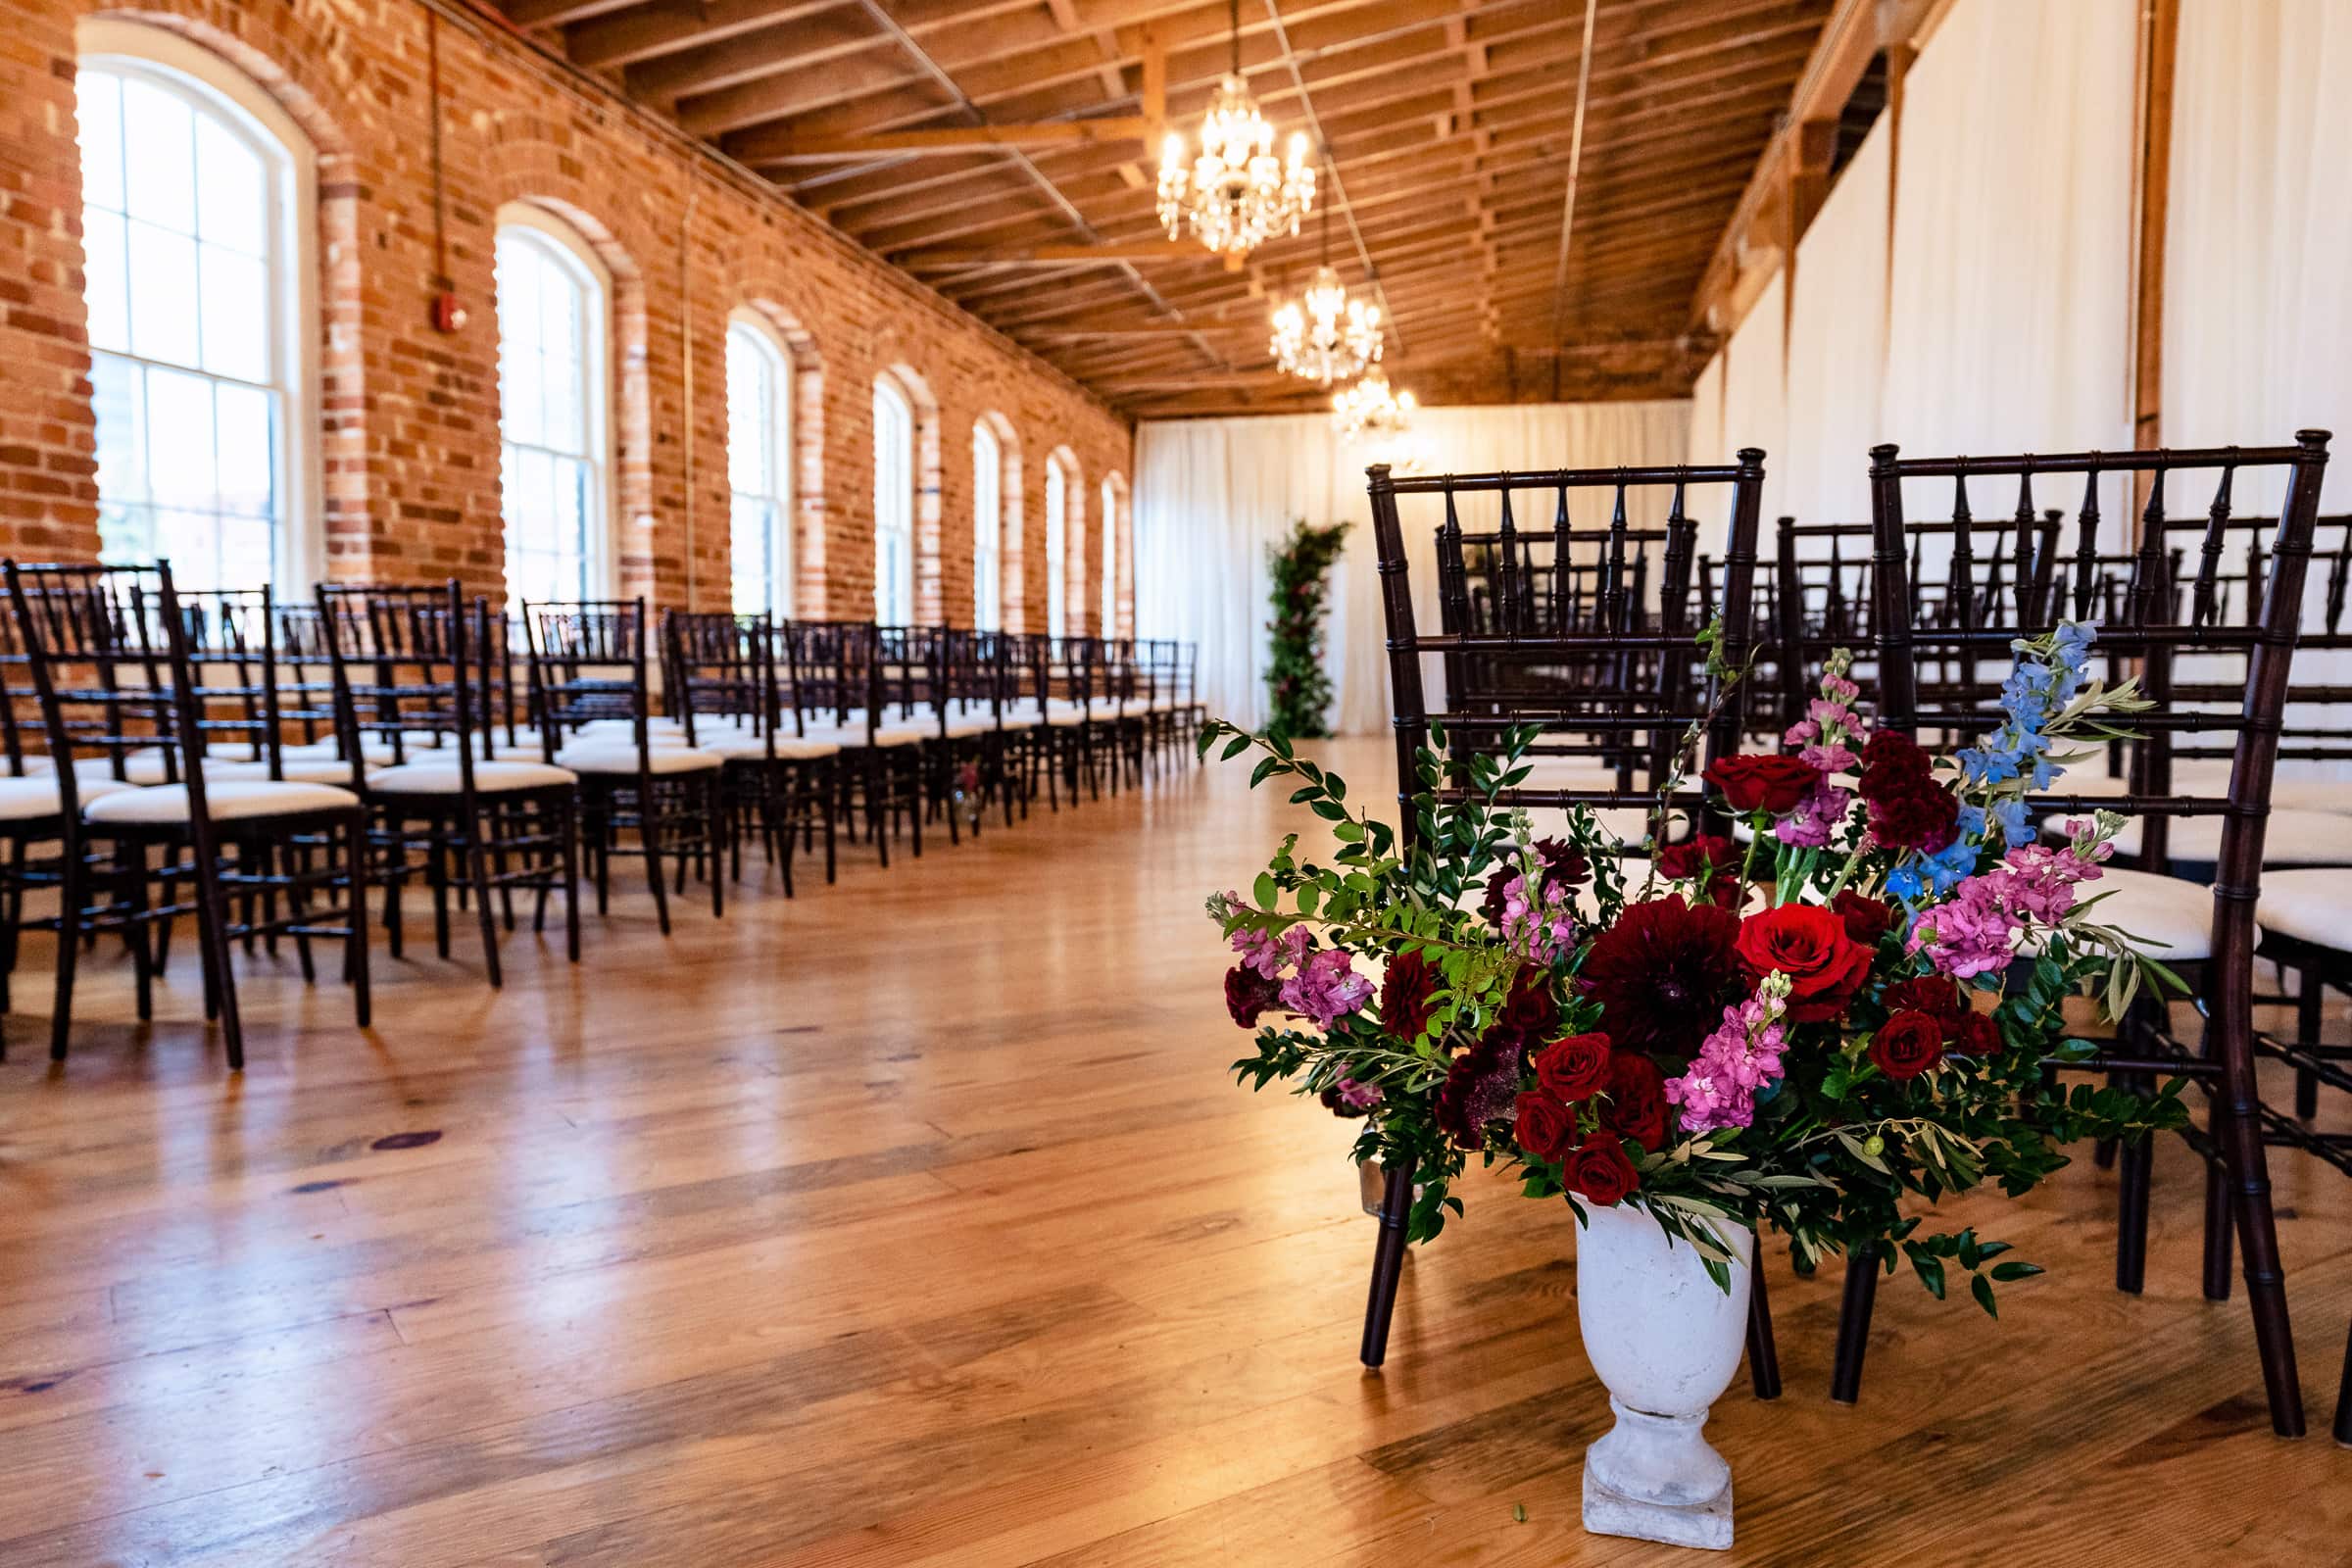 Historic Raleigh Venue Melrose Knitting Mill set up for a wedding ceremony | photos by Kivus & Camera